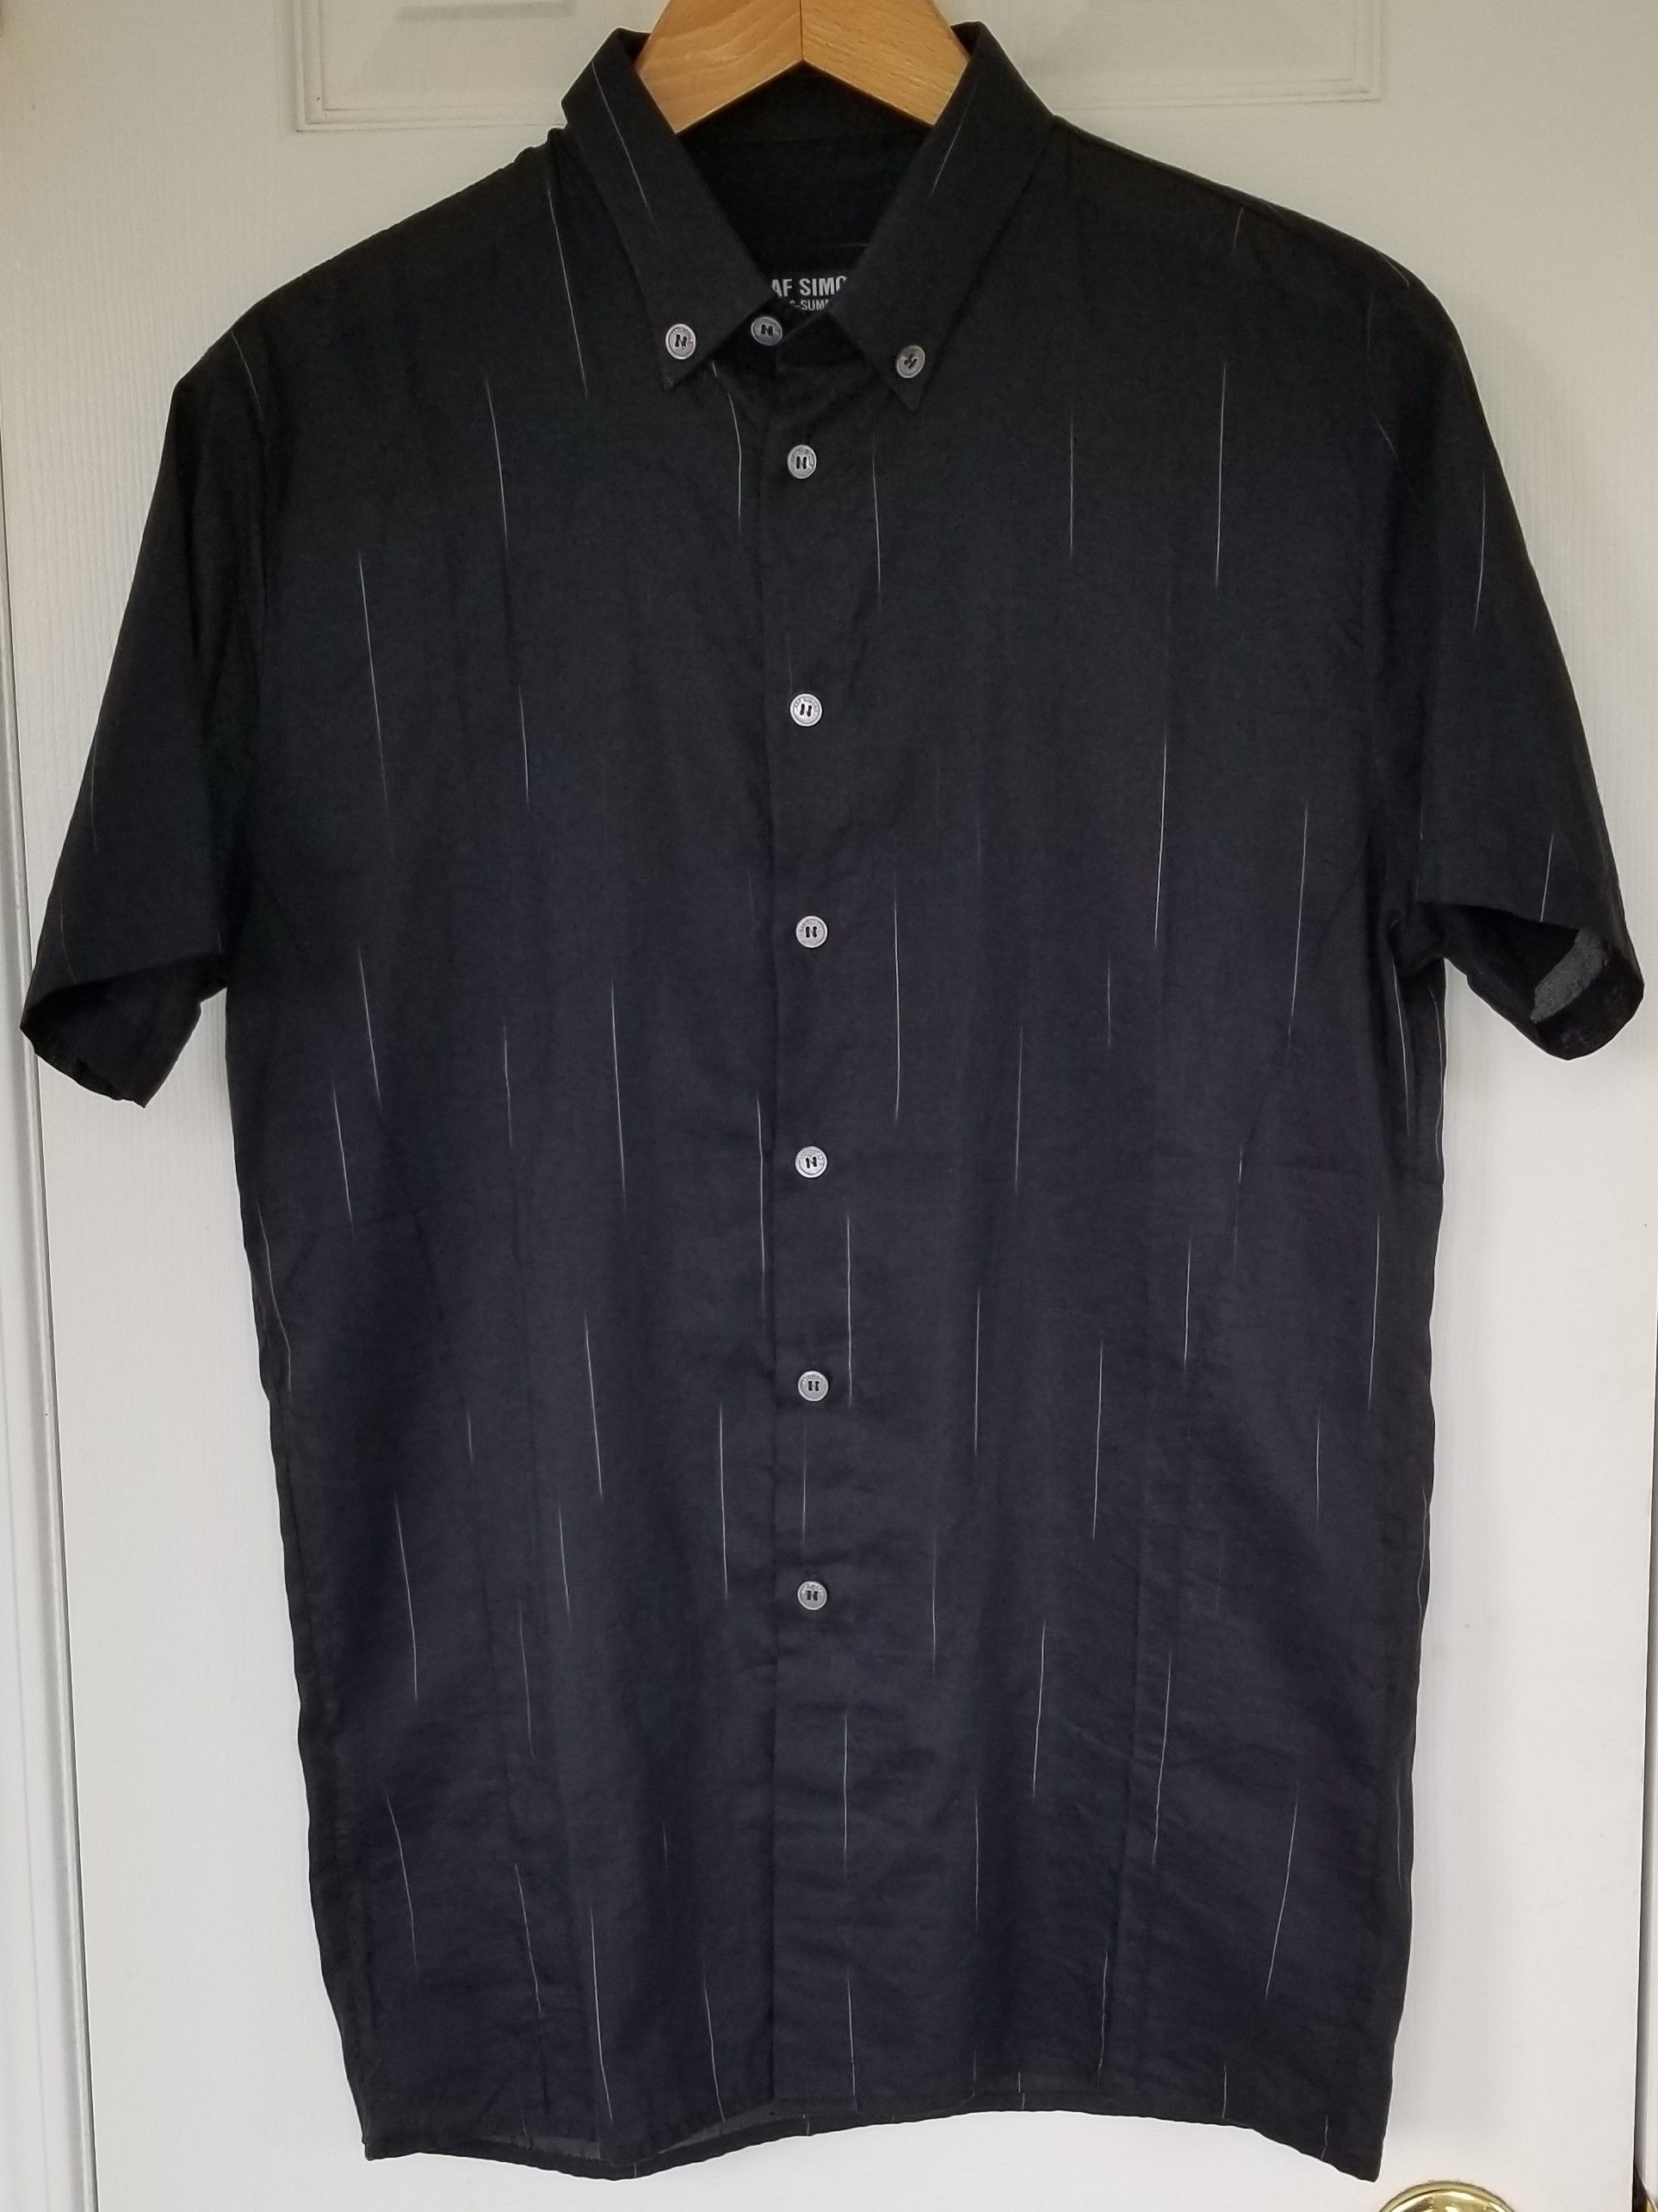 Pre-owned Raf Simons Black Short Sleeve Button Up Shirt Small 46